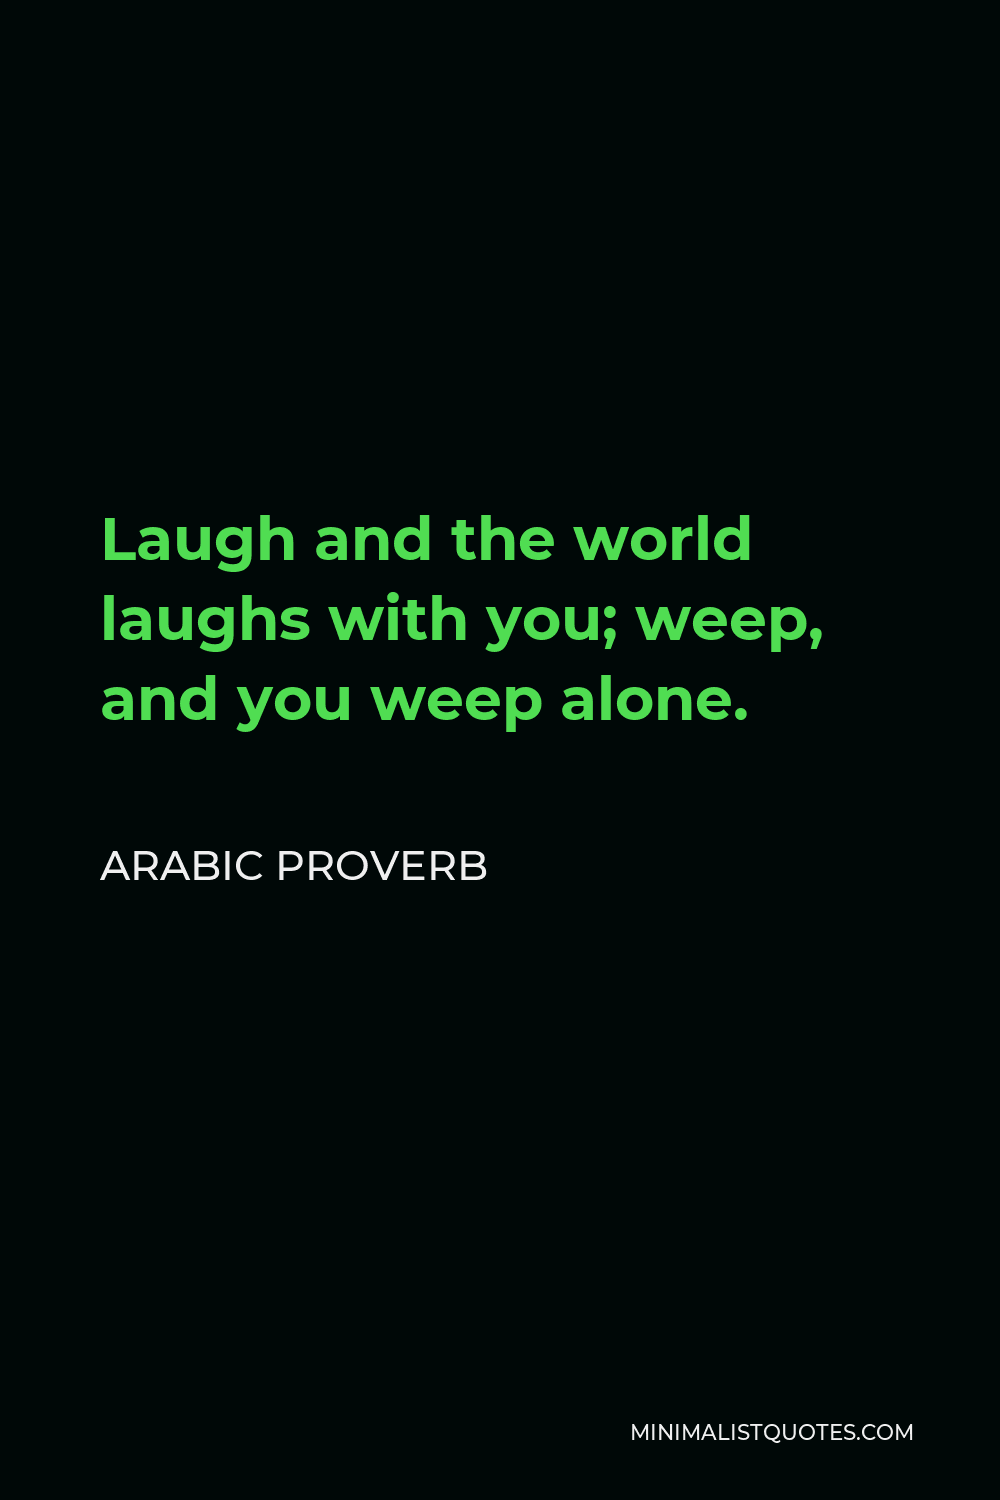 Arabic Proverb Quote - Laugh and the world laughs with you; weep, and you weep alone.